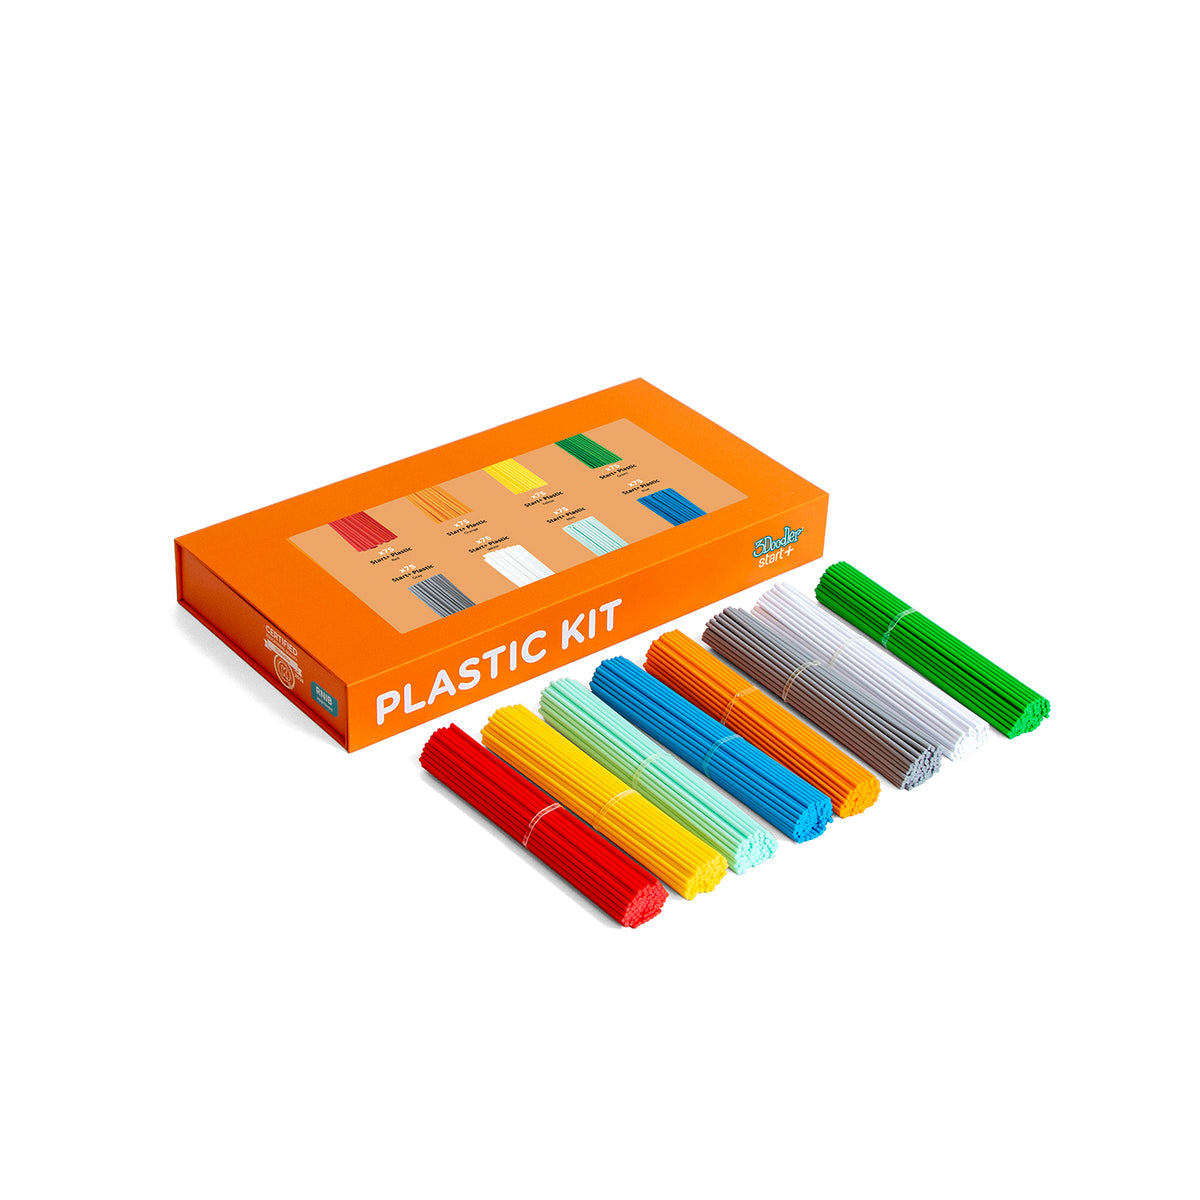 A Box full of Color Pens Idea for Kids to Draw ability learning